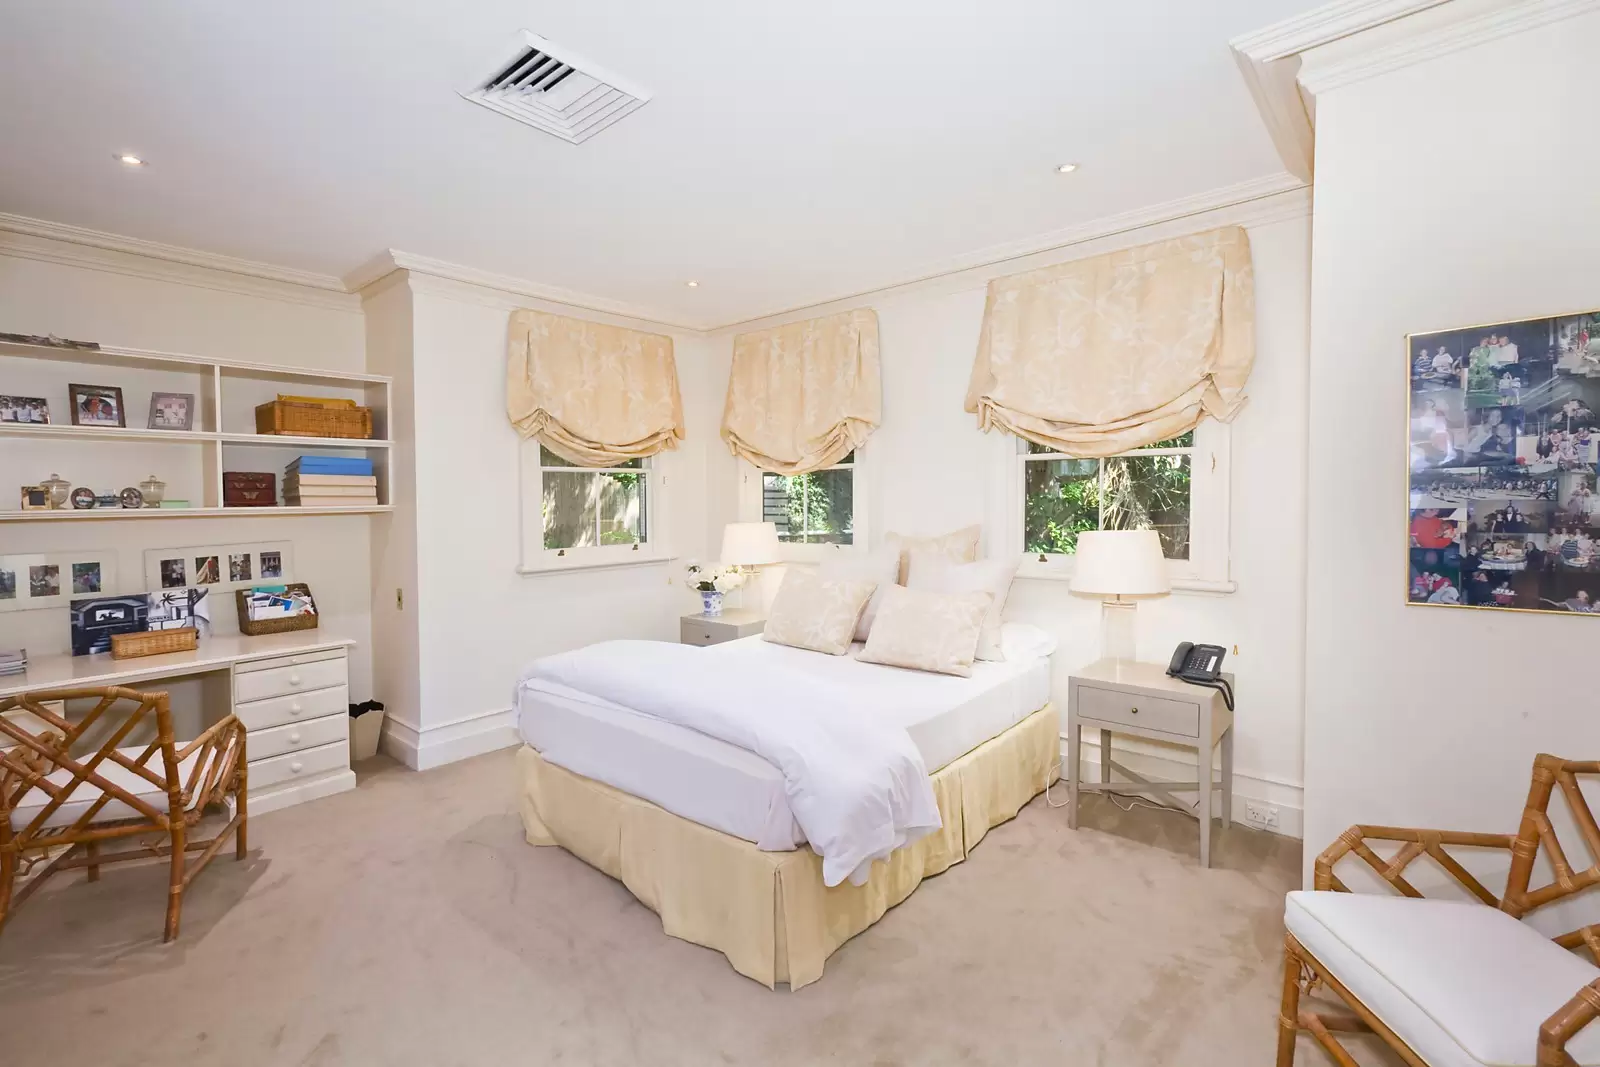 Photo #10: 2 Carrington Avenue, Bellevue Hill - Sold by Sydney Sotheby's International Realty